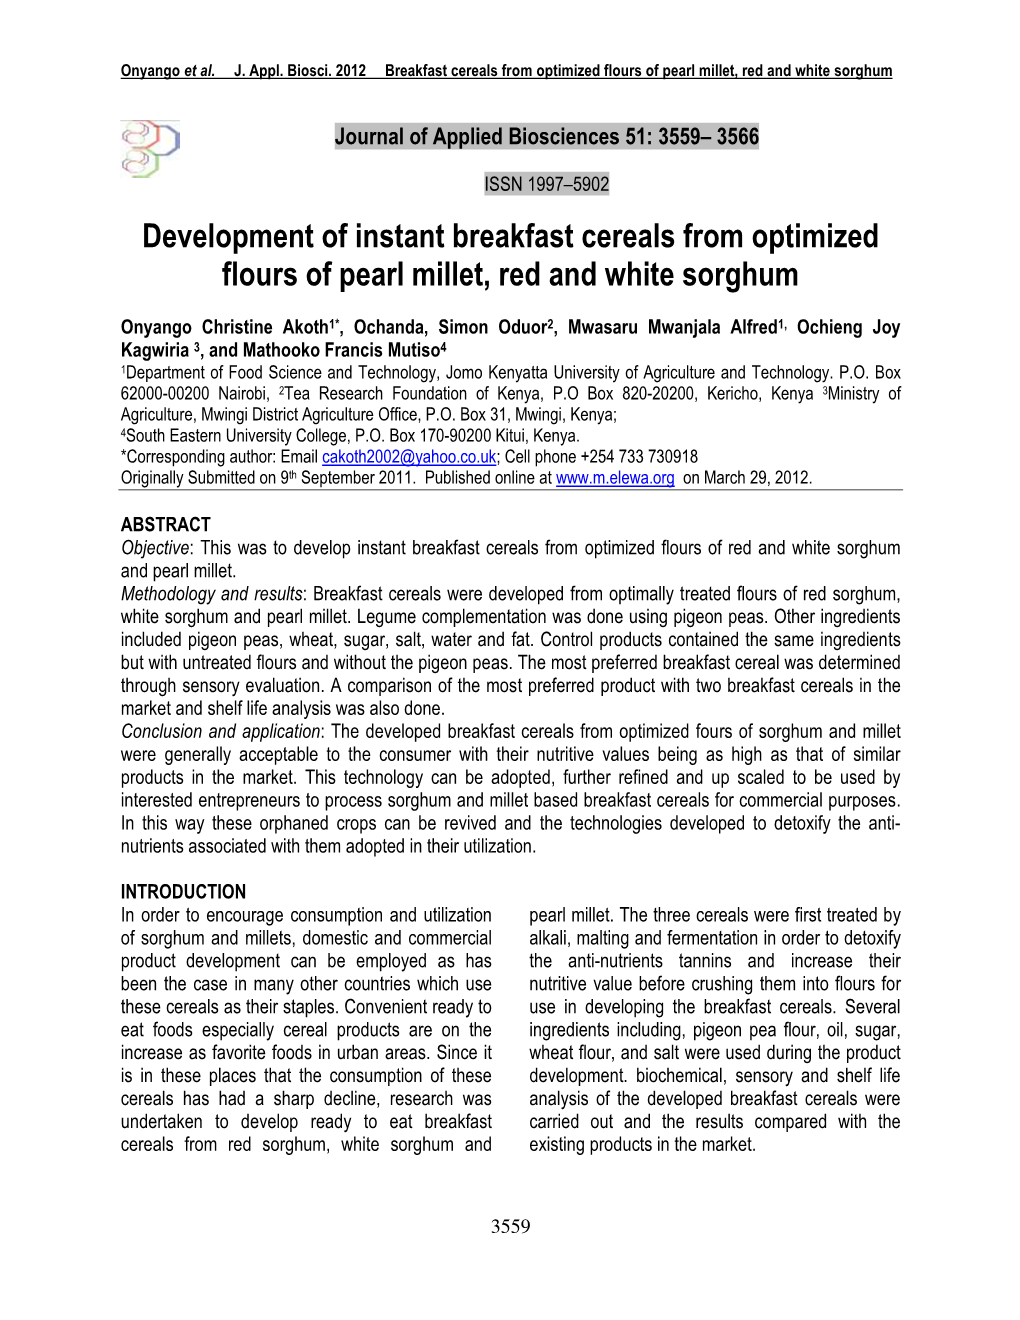 Development of Instant Breakfast Cereals from Optimized Flours of Pearl Millet, Red and White Sorghum